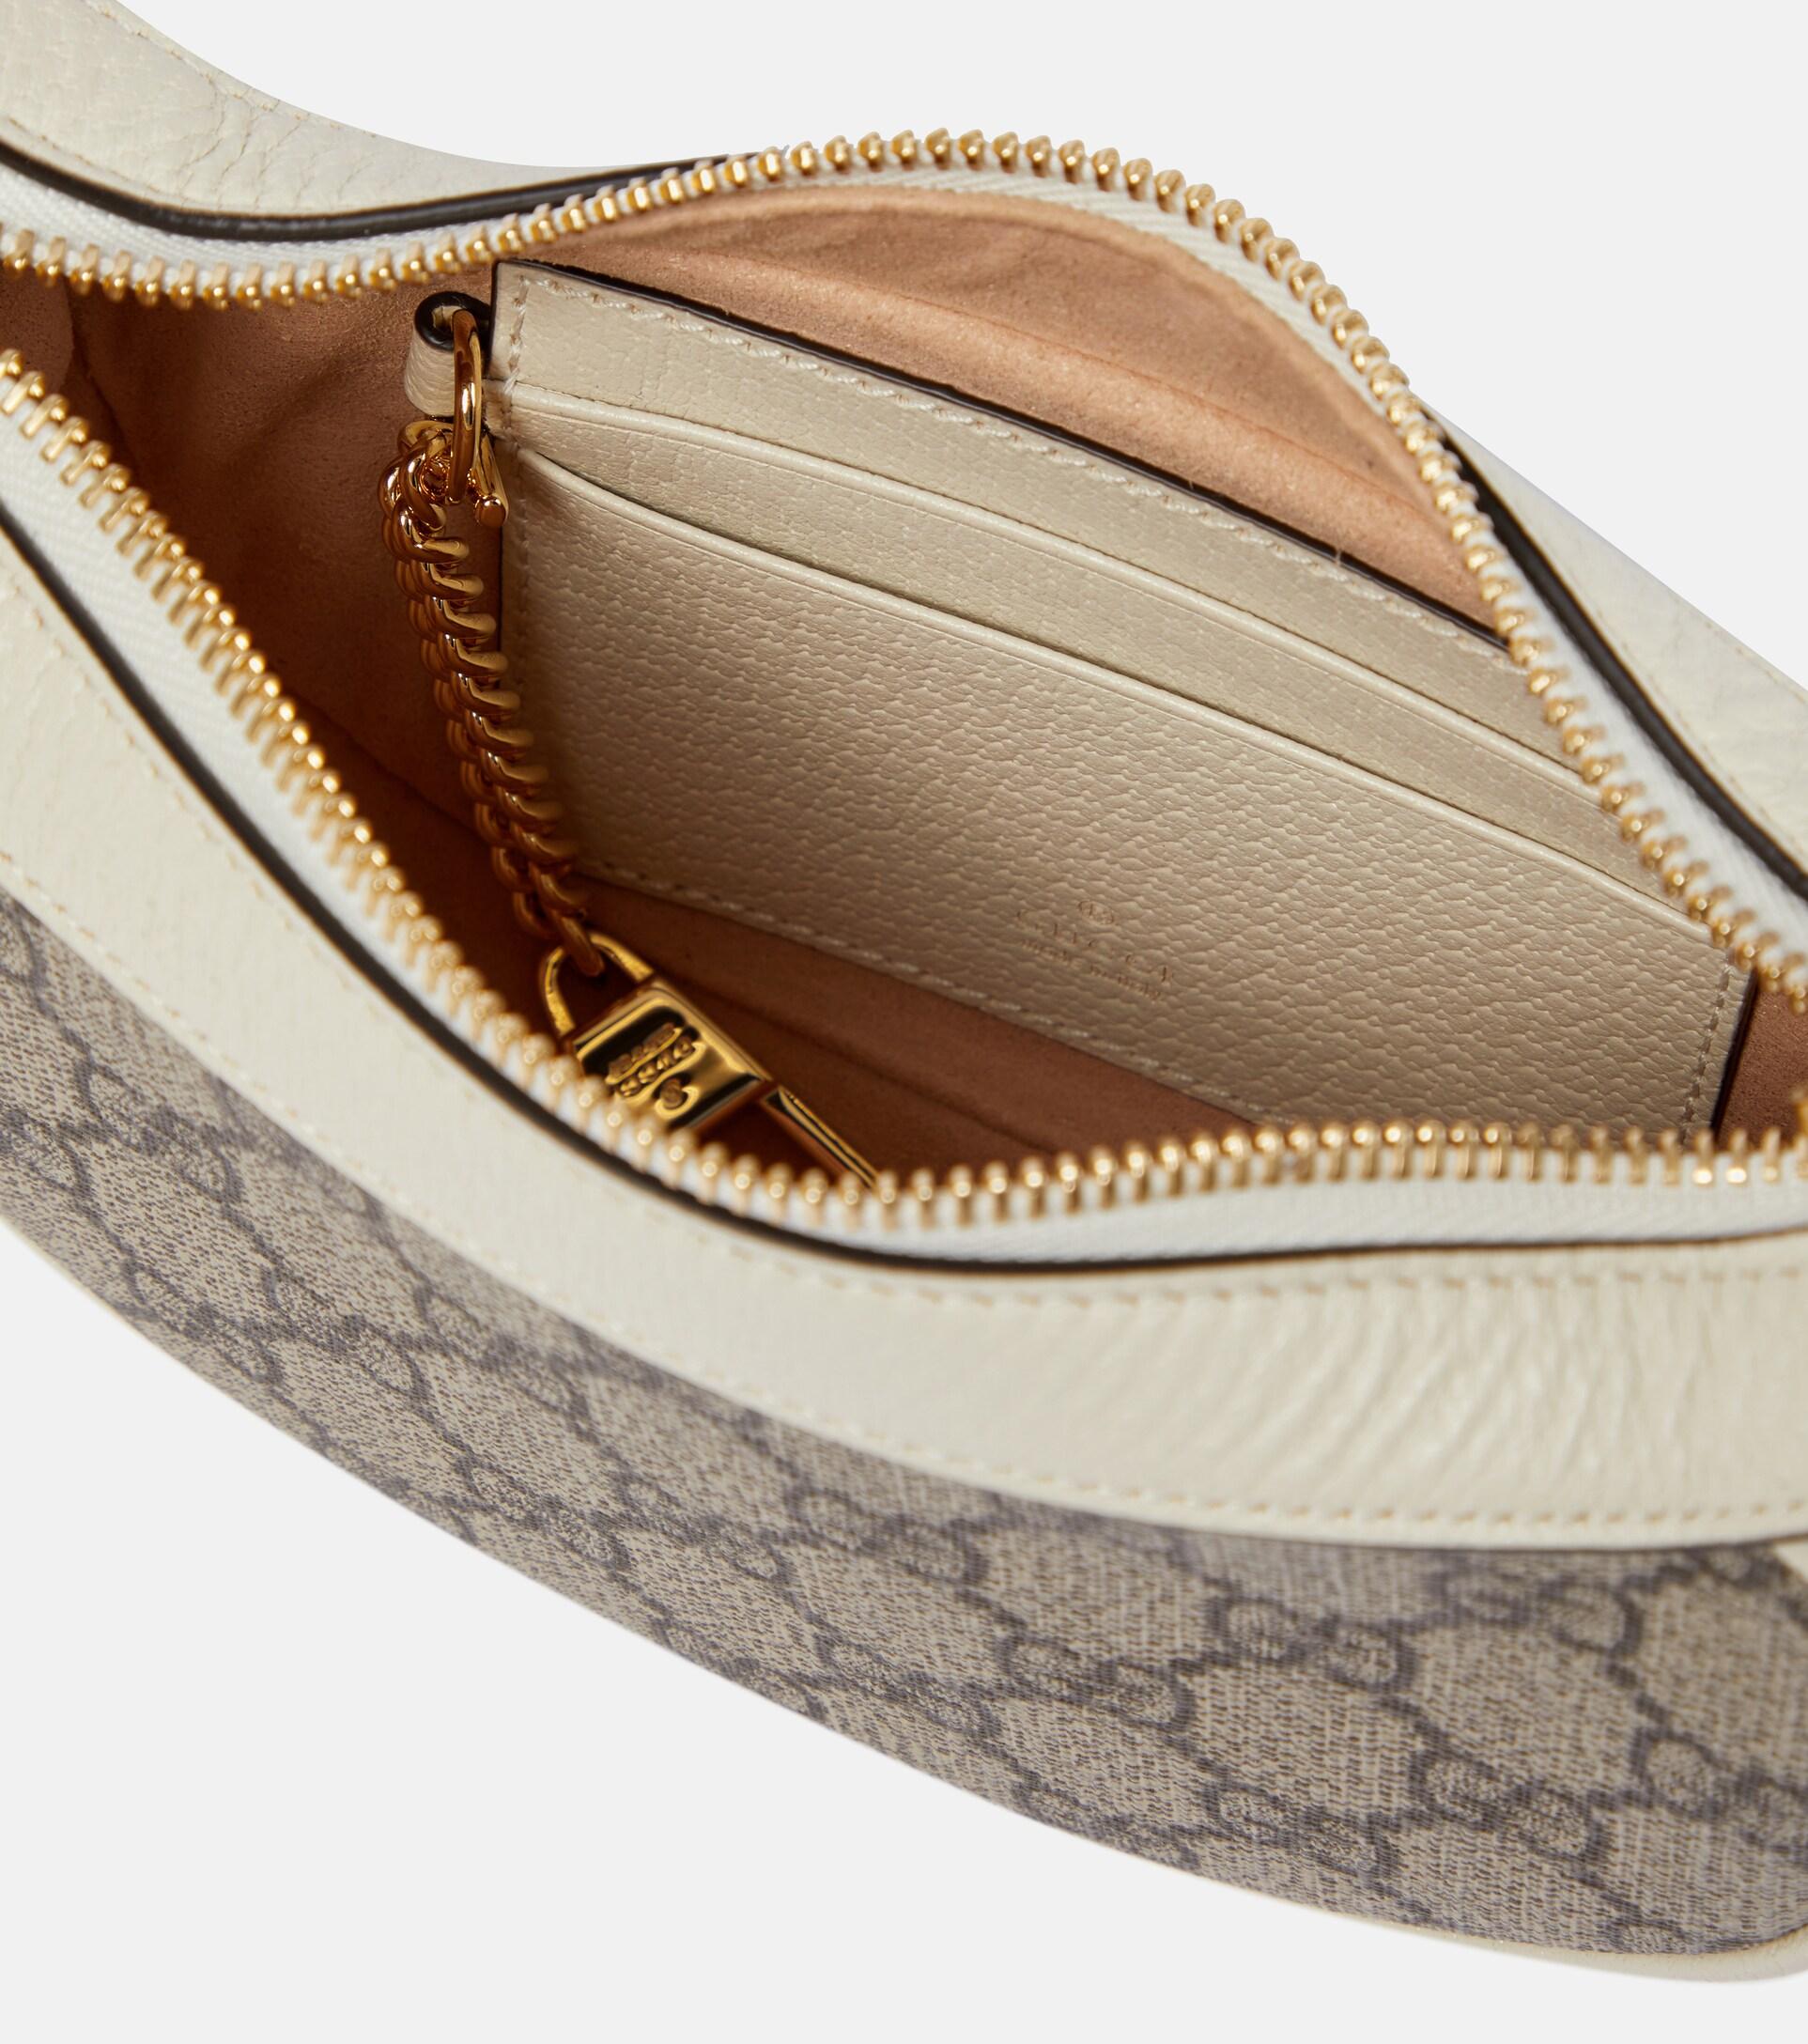 GUCCI Ophidia mini webbing-trimmed textured-leather and printed